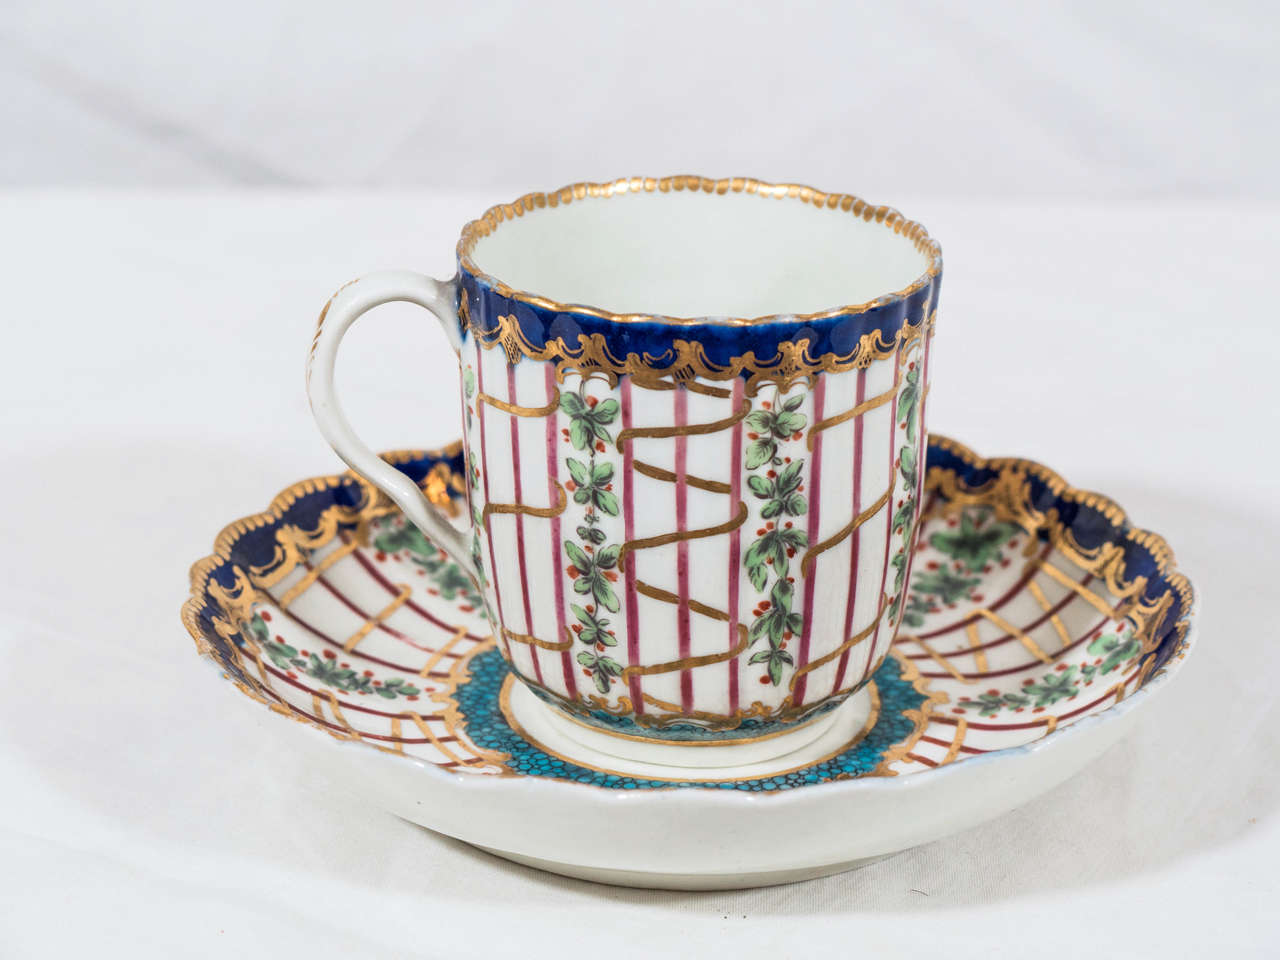 A very fine 18th century Dr. Wall Worcester soft-paste porcelain coffee can and saucer, fluted in the Sevres style with scalloped gilt edges. It is painted in over glaze colored enamels in a version of the 'Hop Trellis' pattern with a turquoise